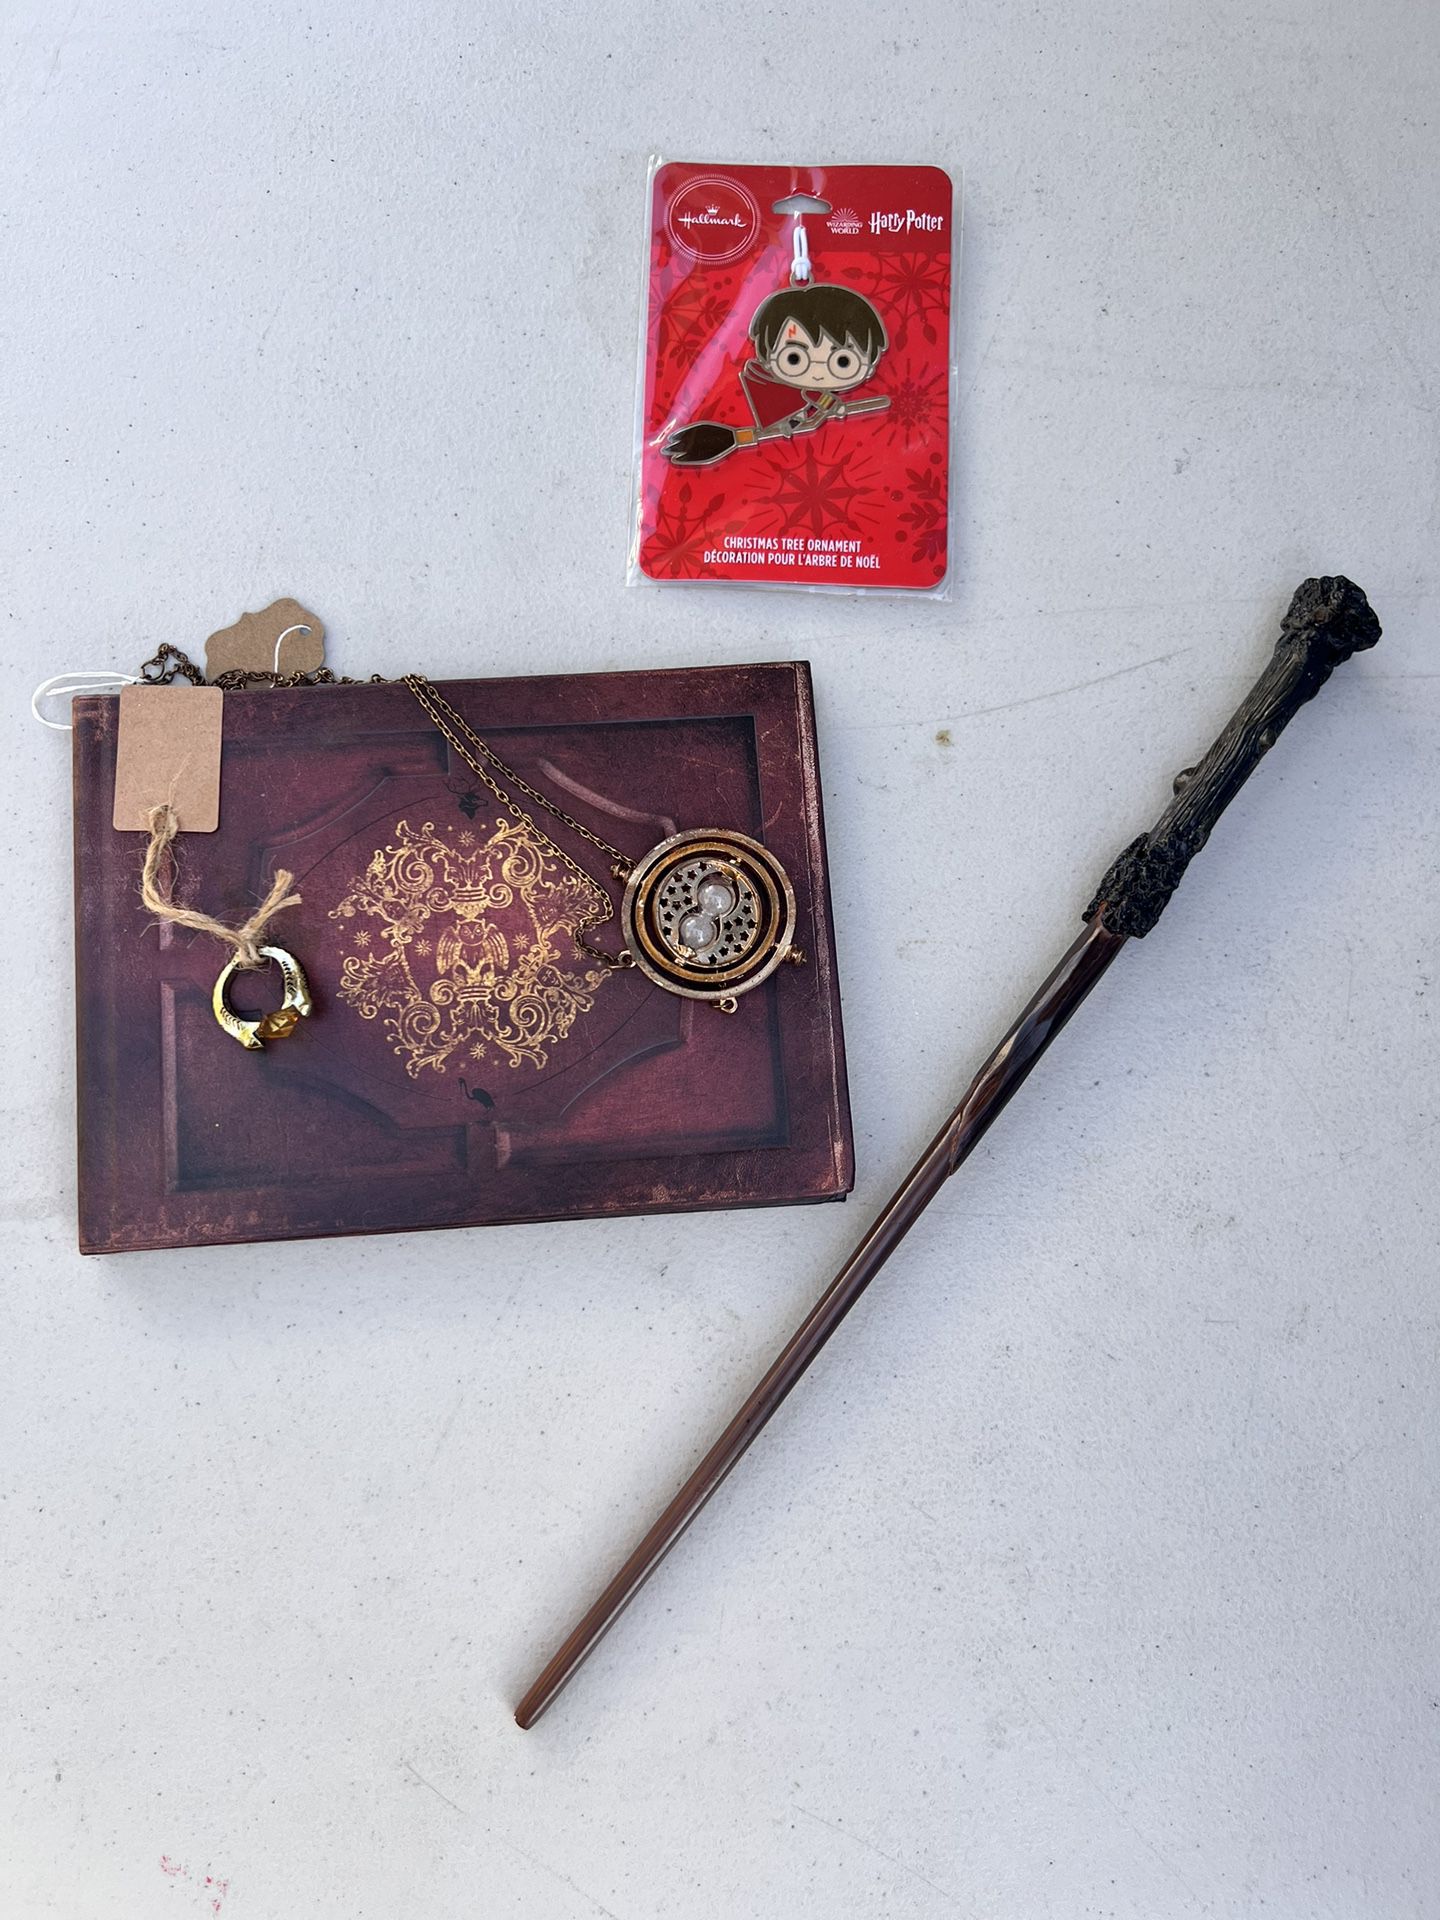 Harry Potter Items, Wand, Movie Book, Voldemort Ring, Time Turner, Harry Potter Ornament 